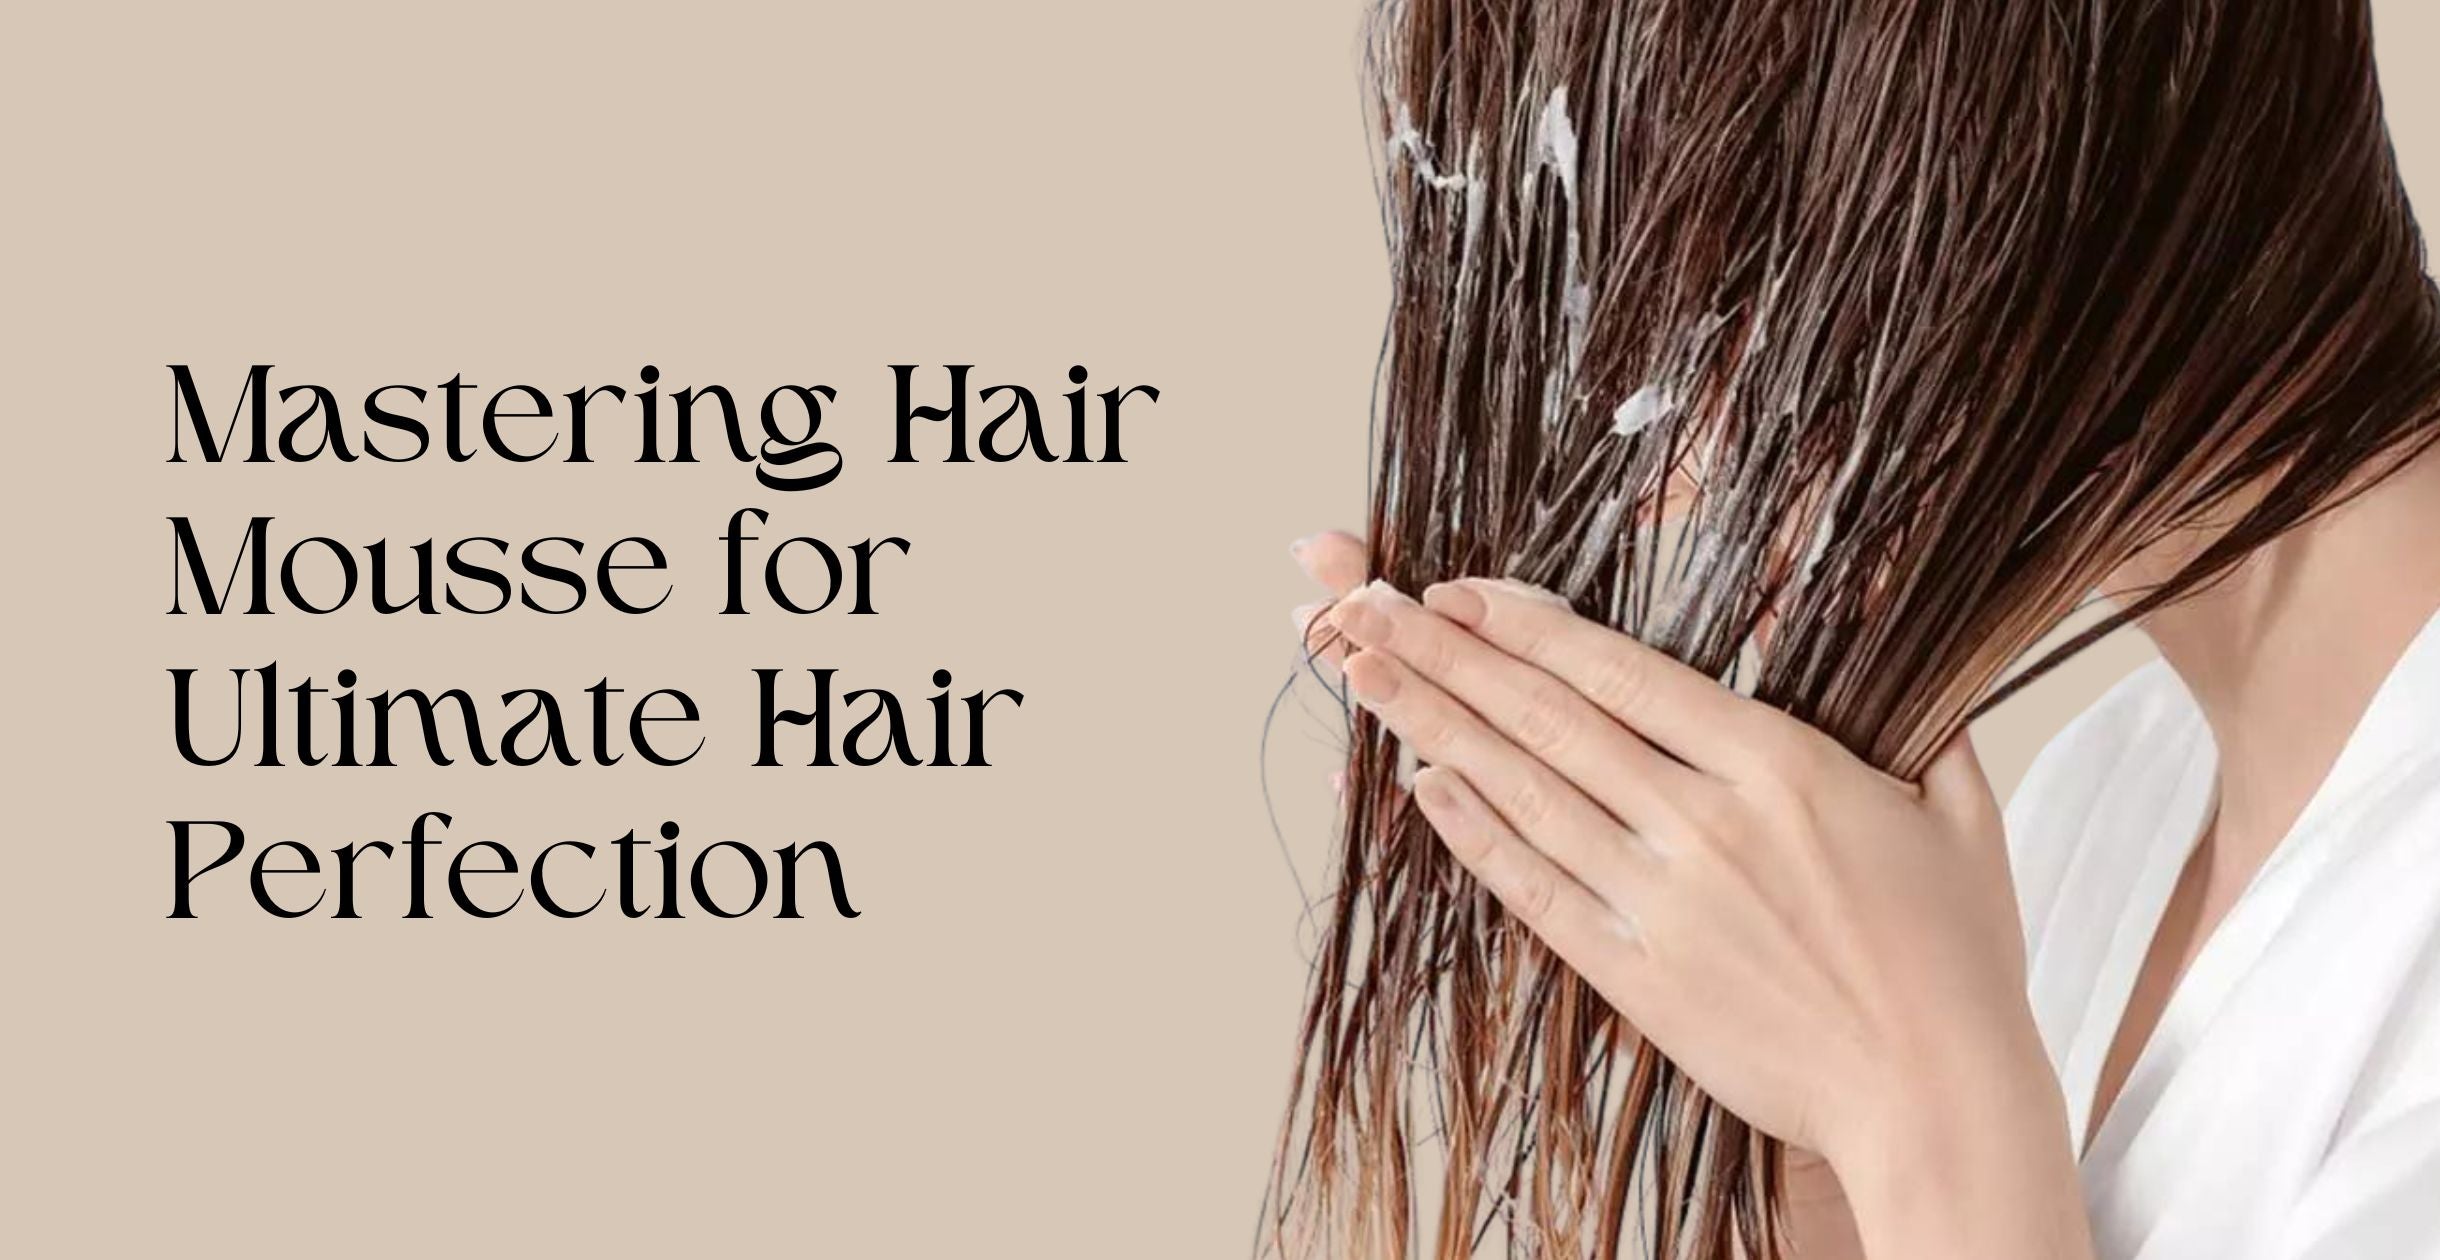 Mastering Hair Mousse for Ultimate Hair Perfection